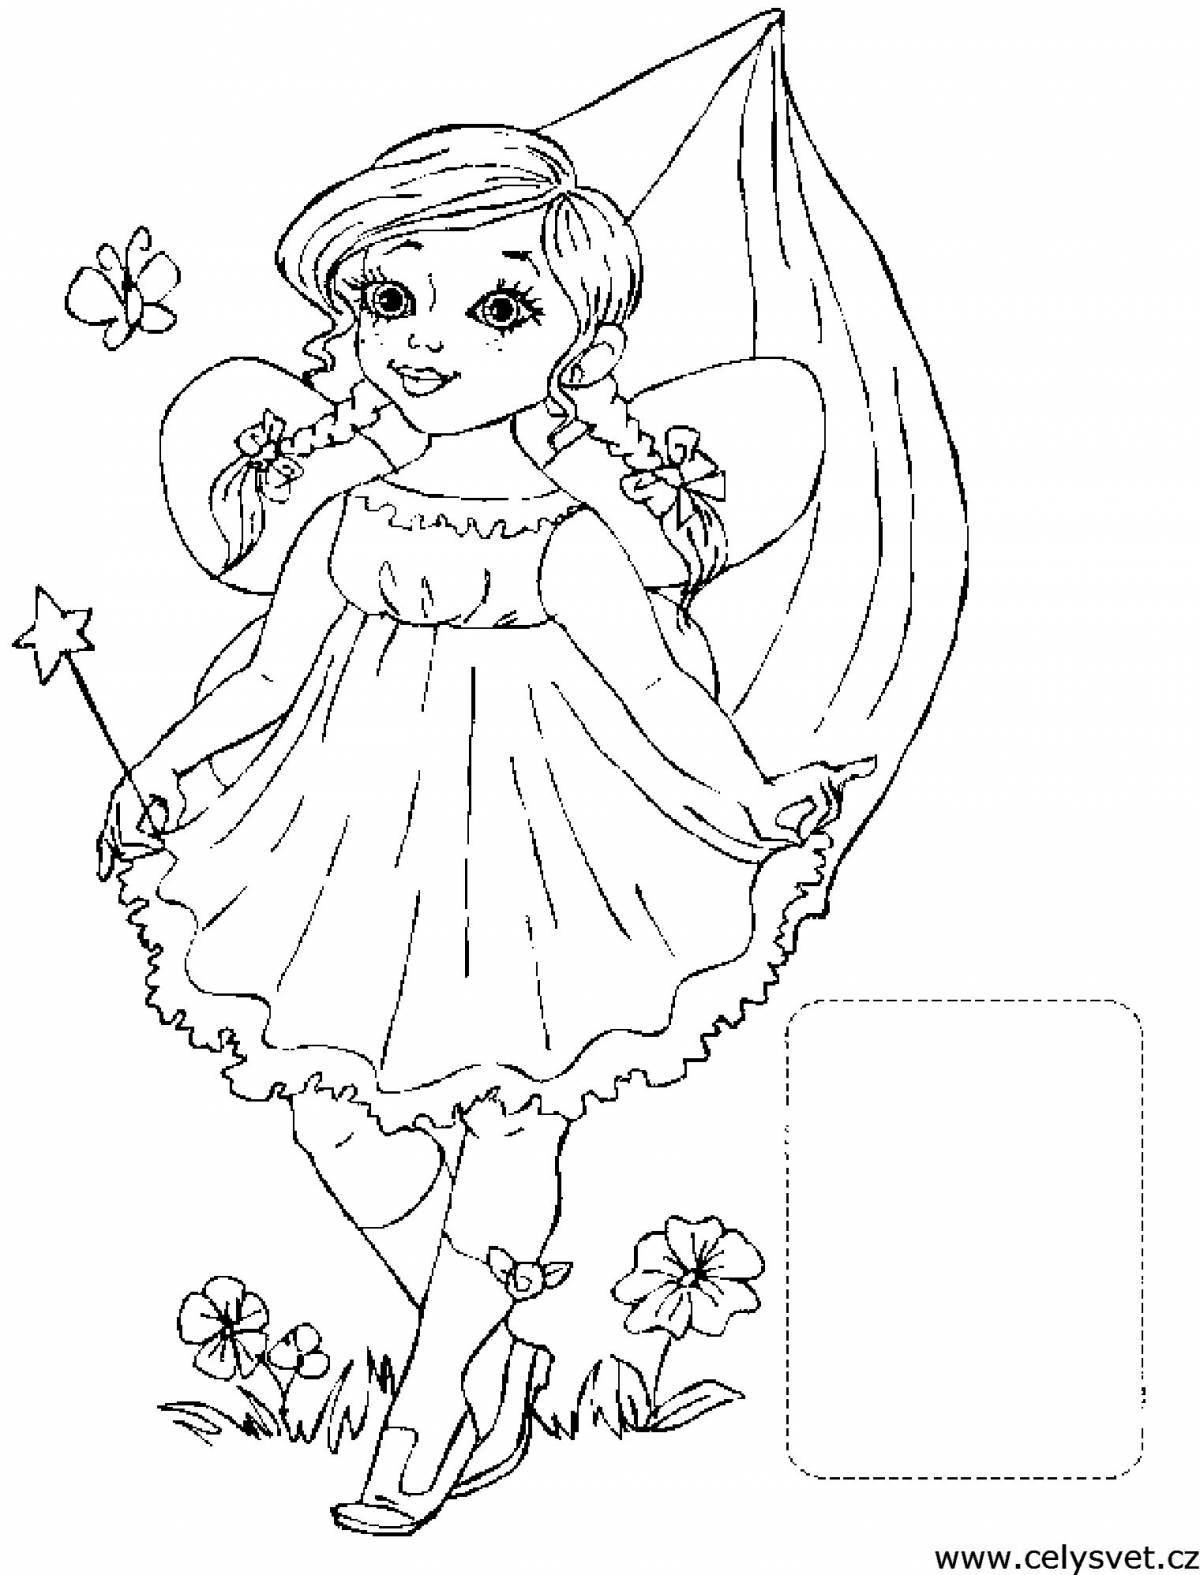 Coloring book glowing little fairy